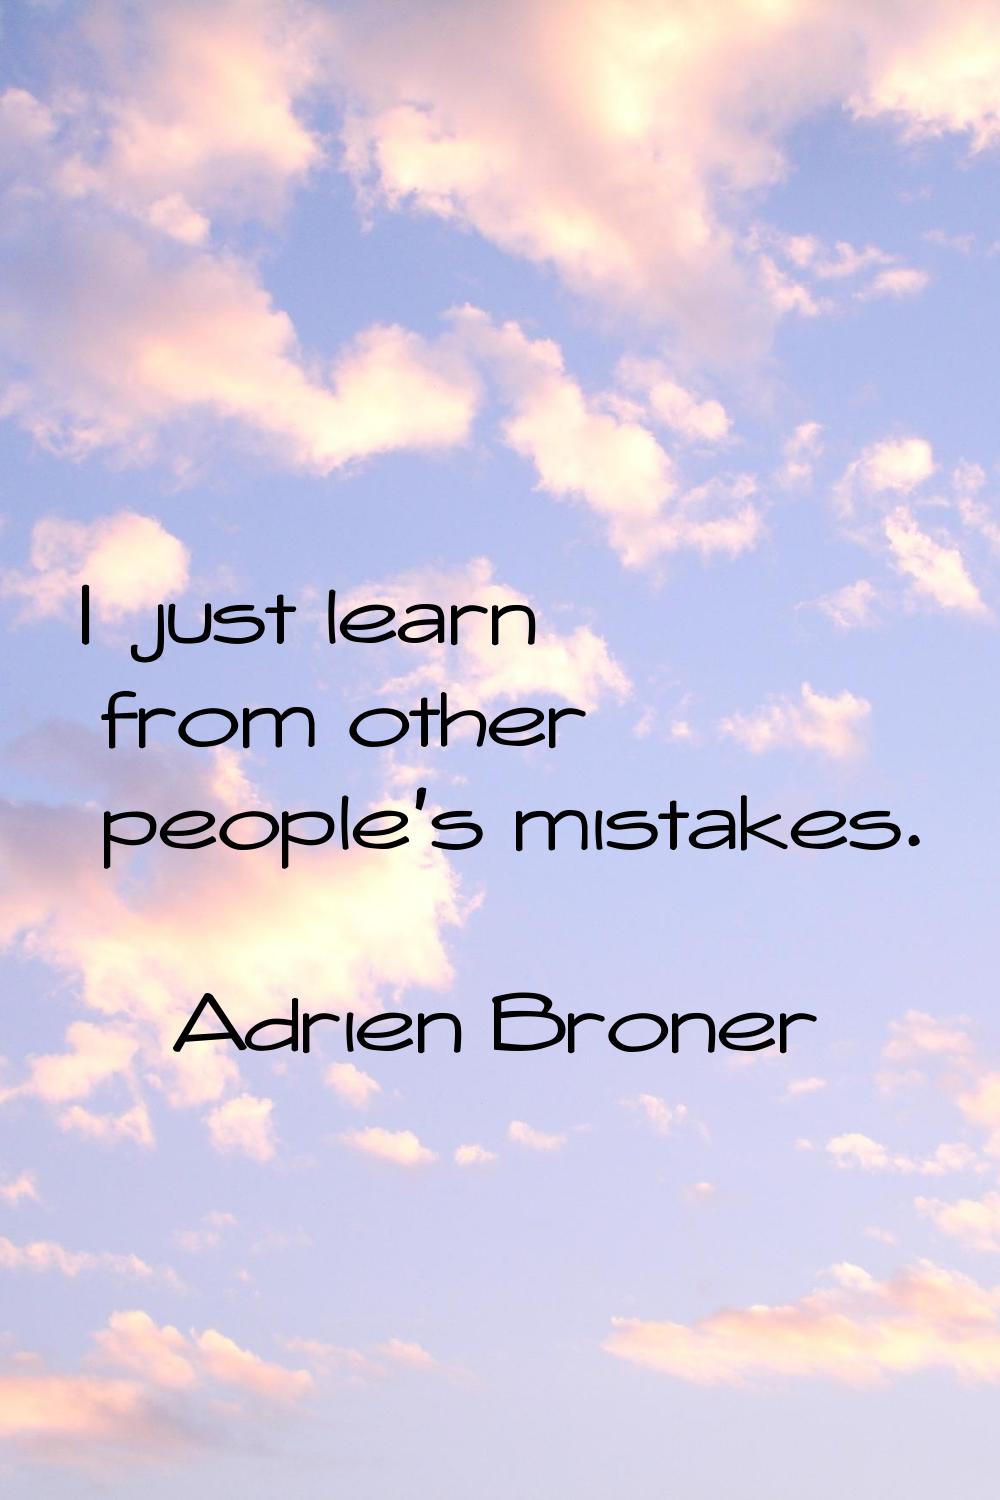 I just learn from other people's mistakes.